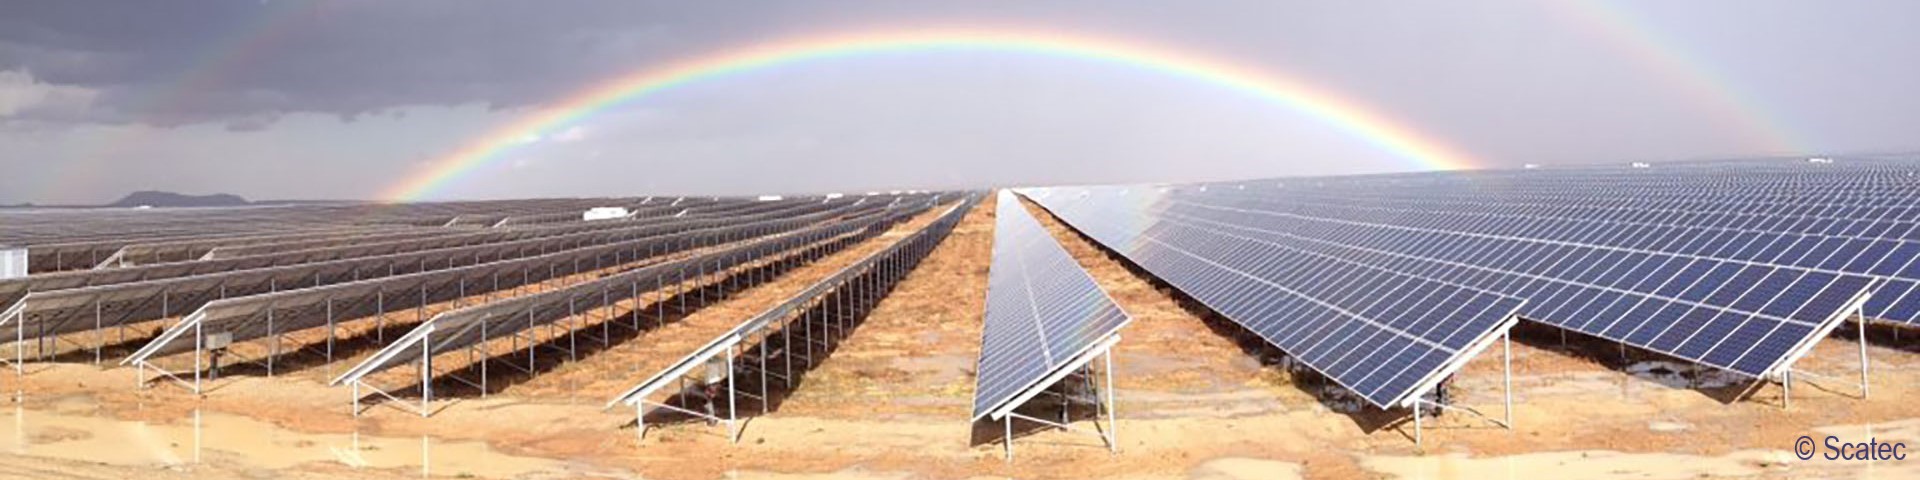 A large number of solar panels standing in rows in a field. There are two rainbows above them. Copyright: Scatec